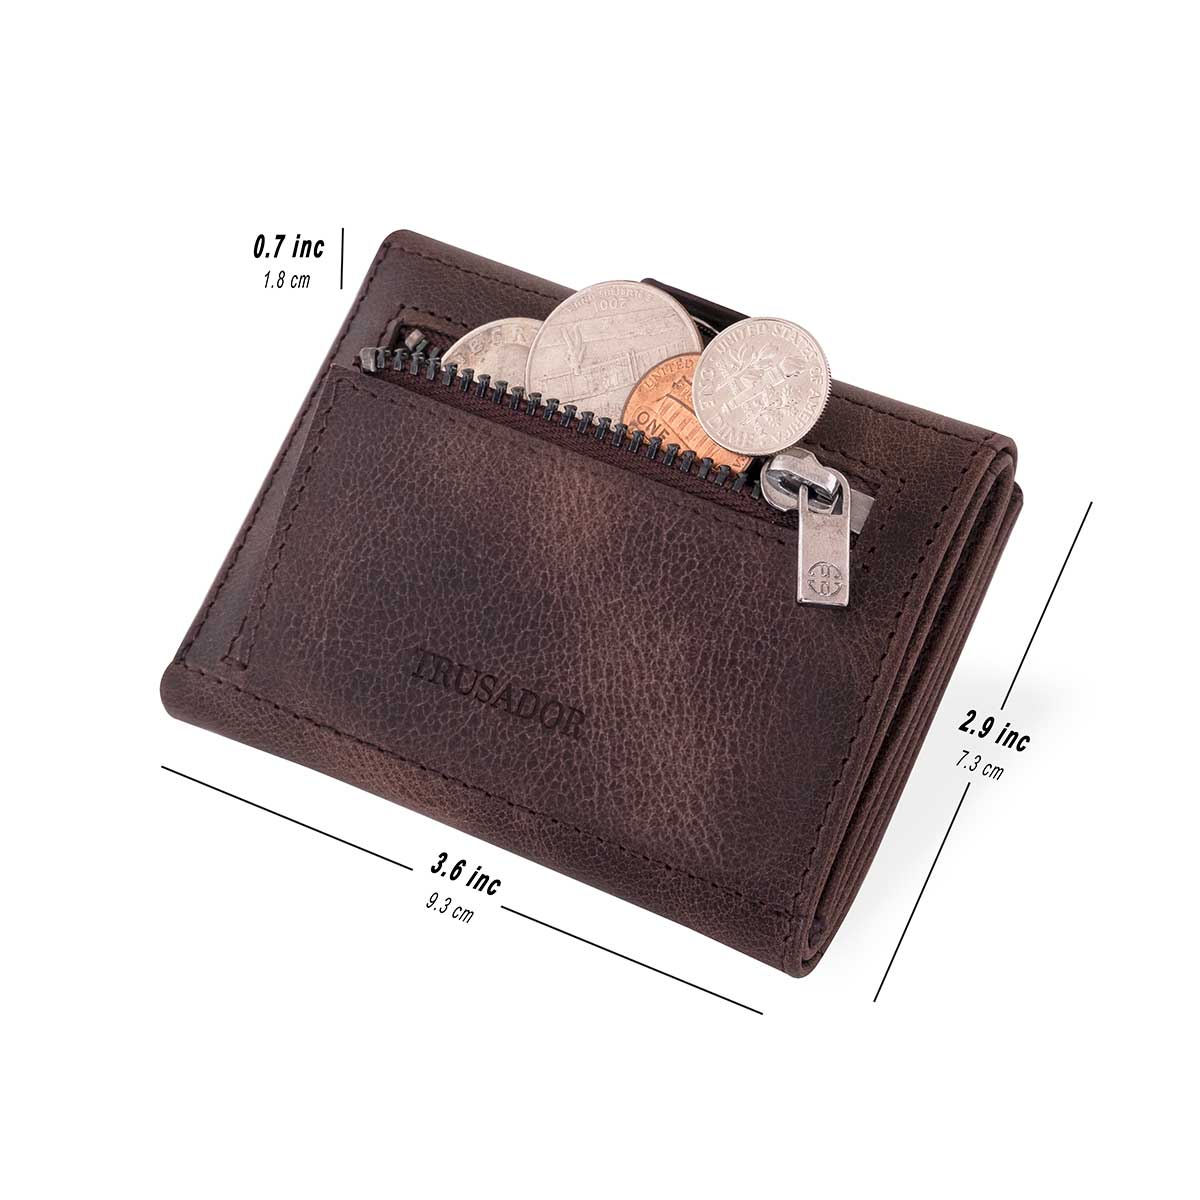 Compact Mini Wallet in Saffiano Leather with Money Clip and Coin Purse